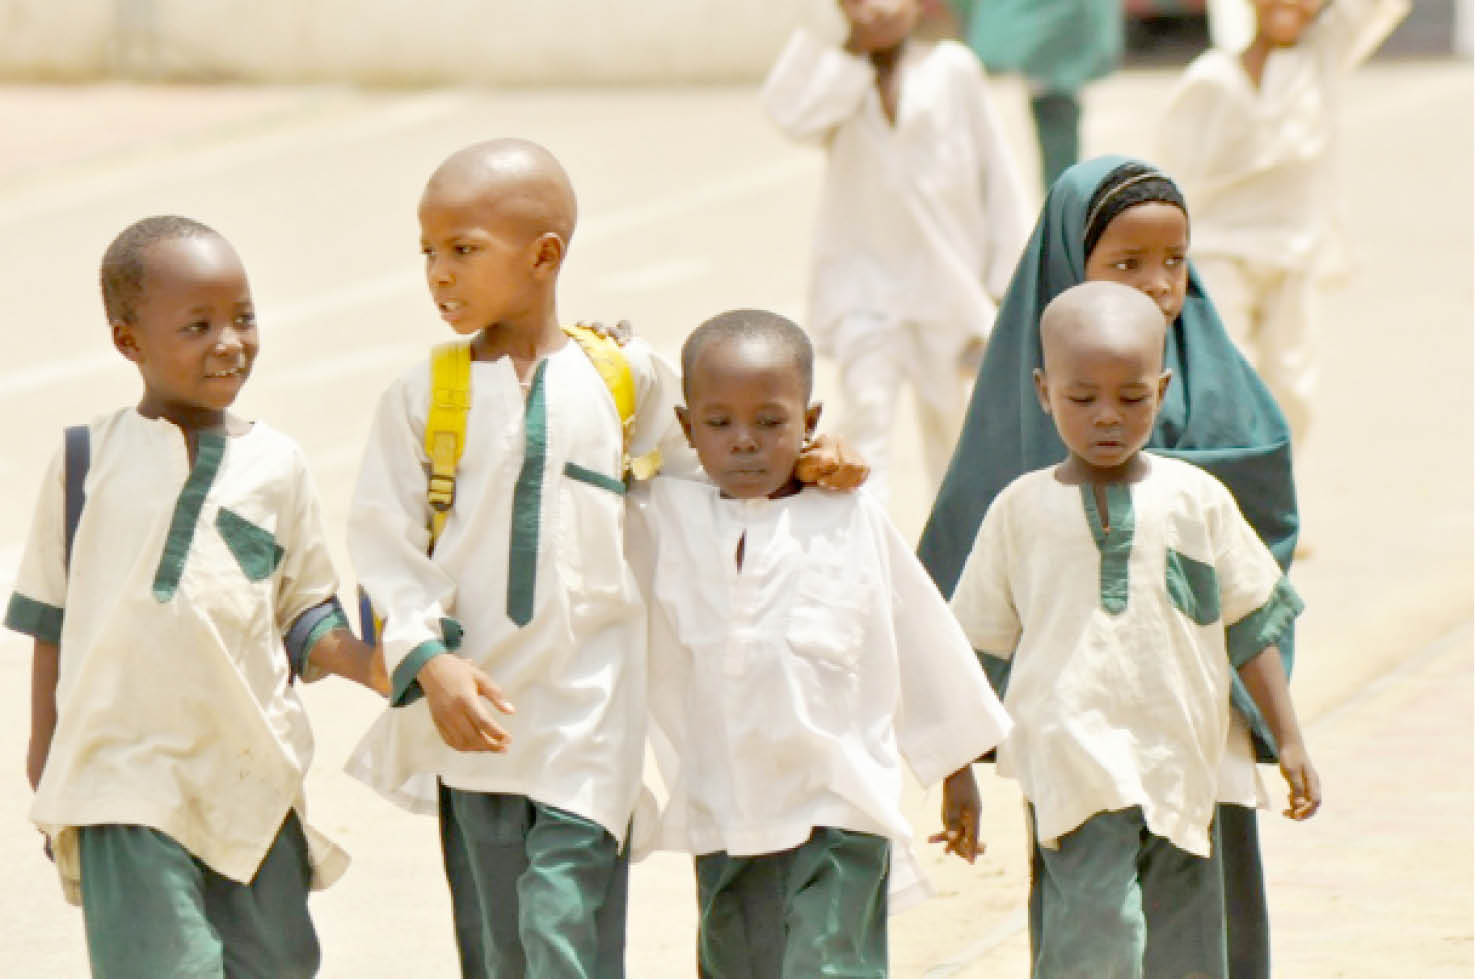 Pupils of a government-owned school where free education policy is being implemented